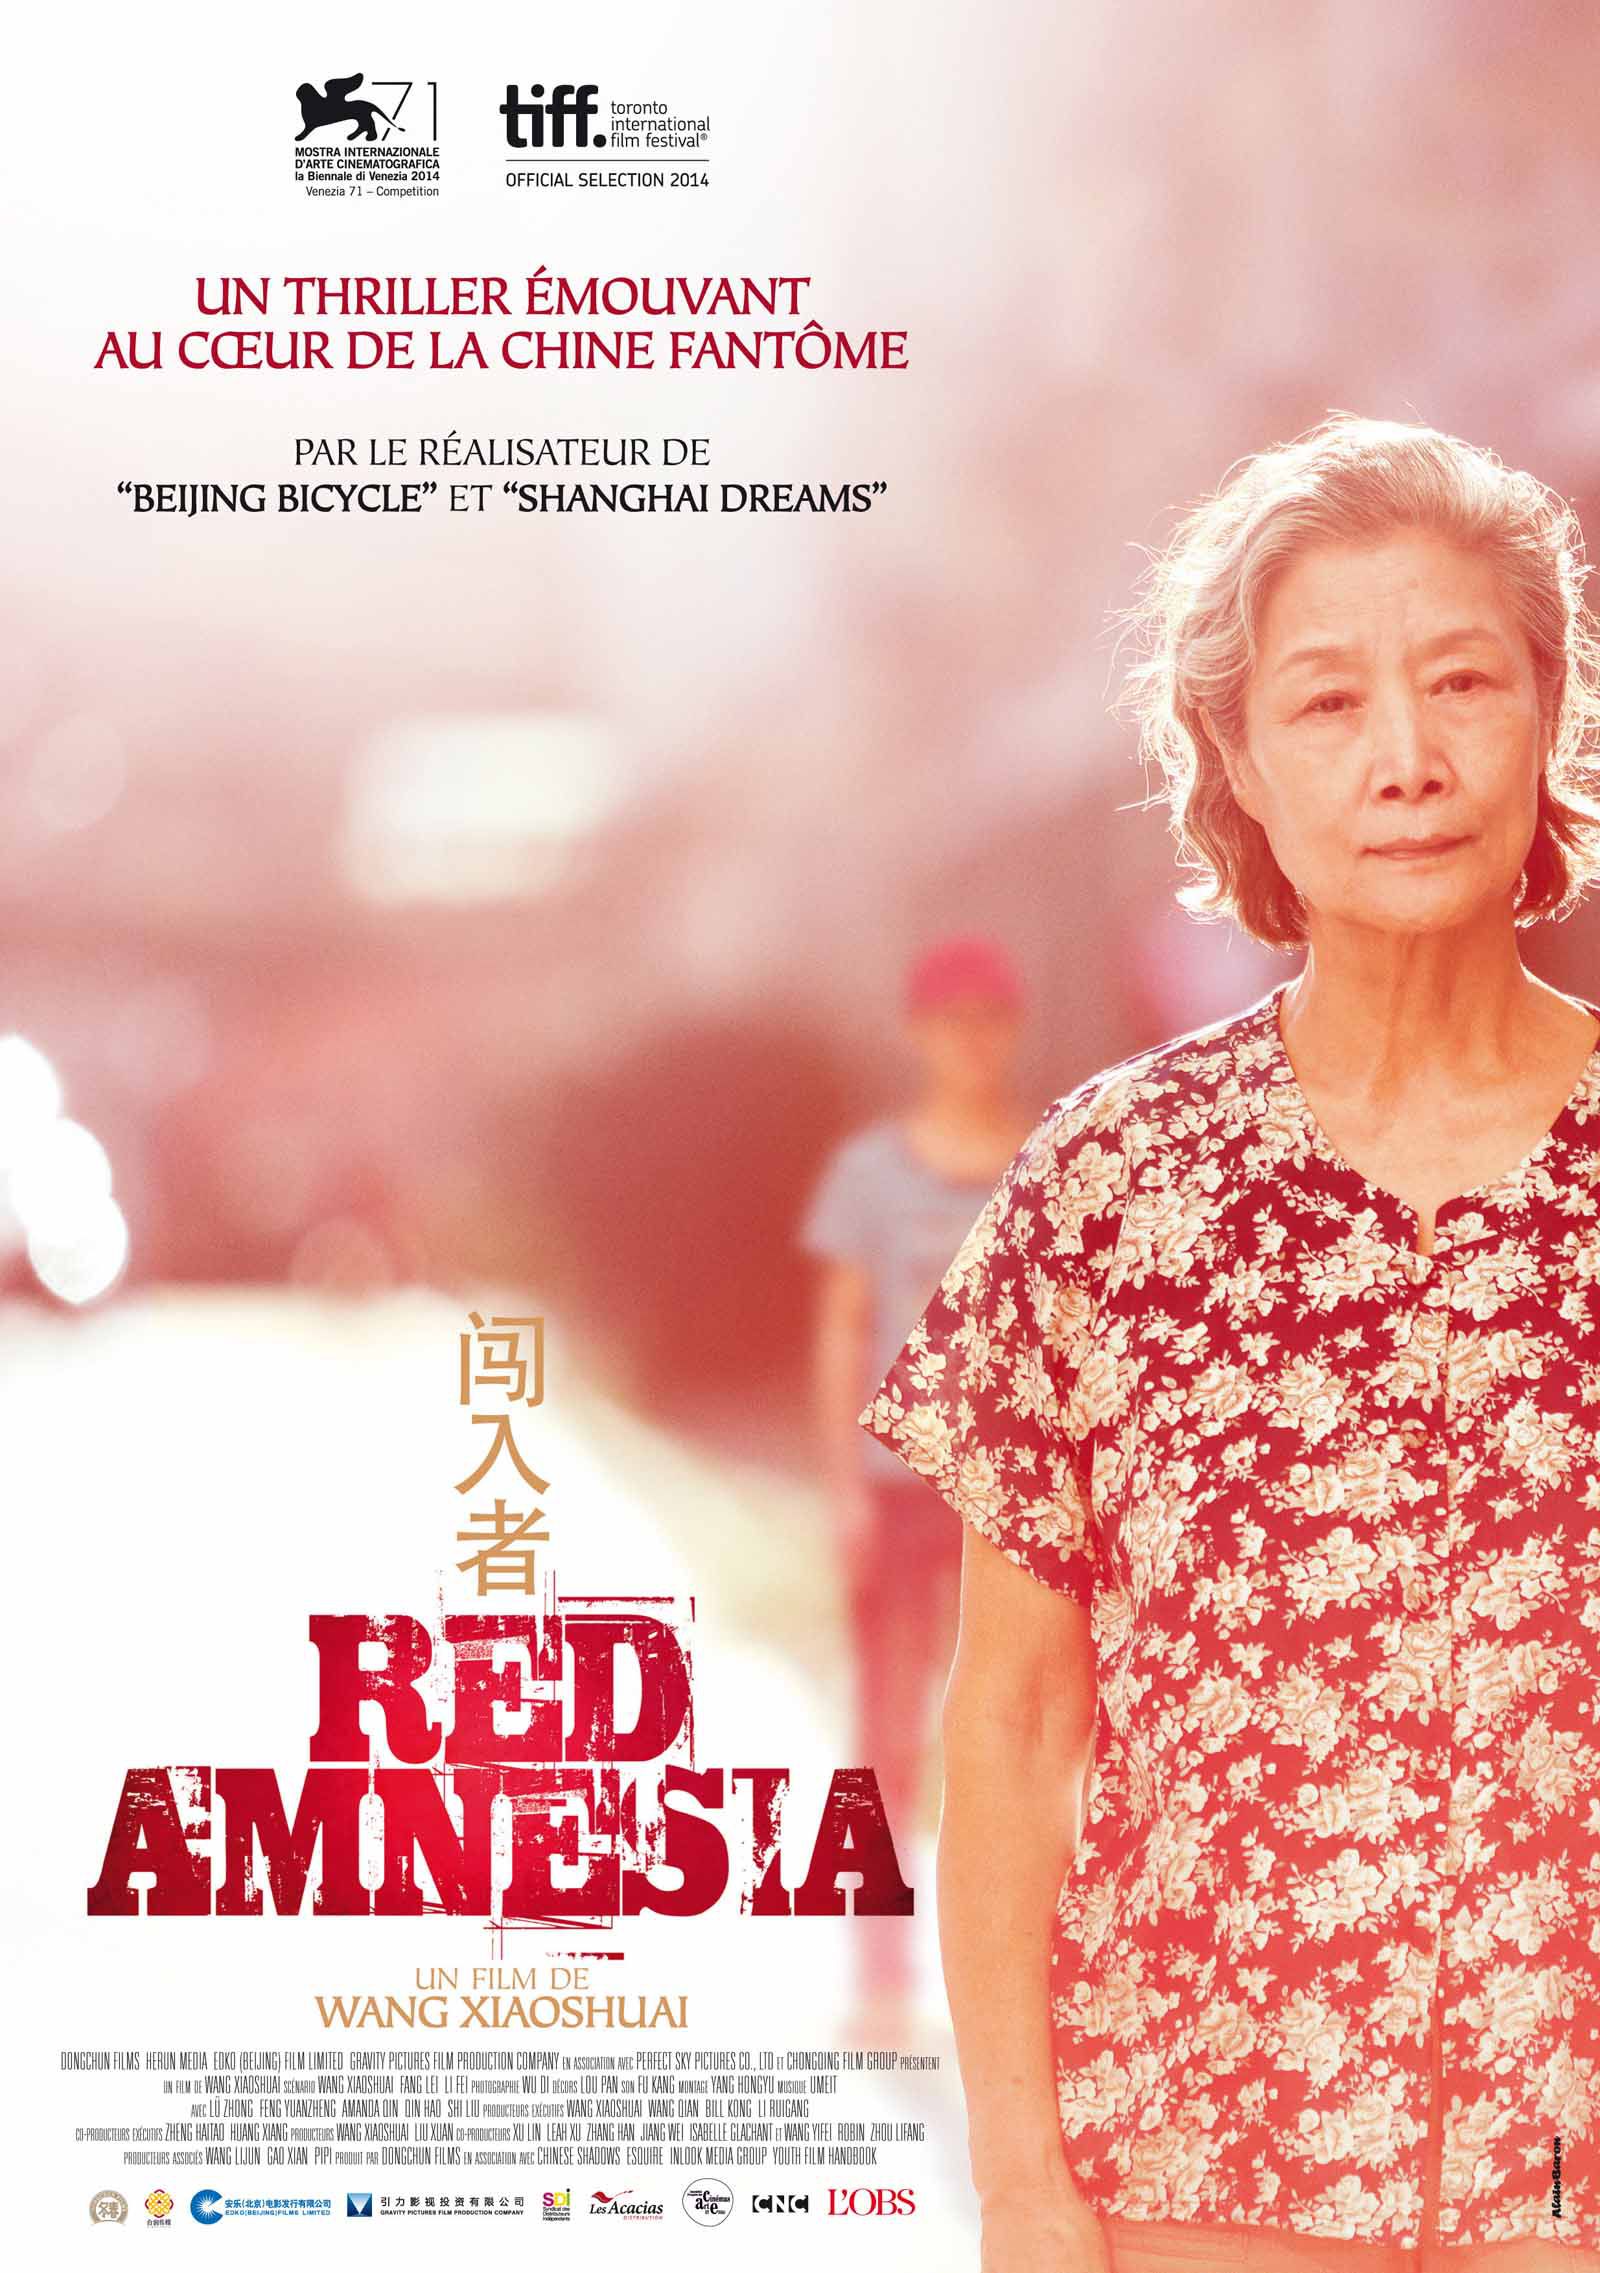 Red Amnesia - Film (2015) streaming VF gratuit complet